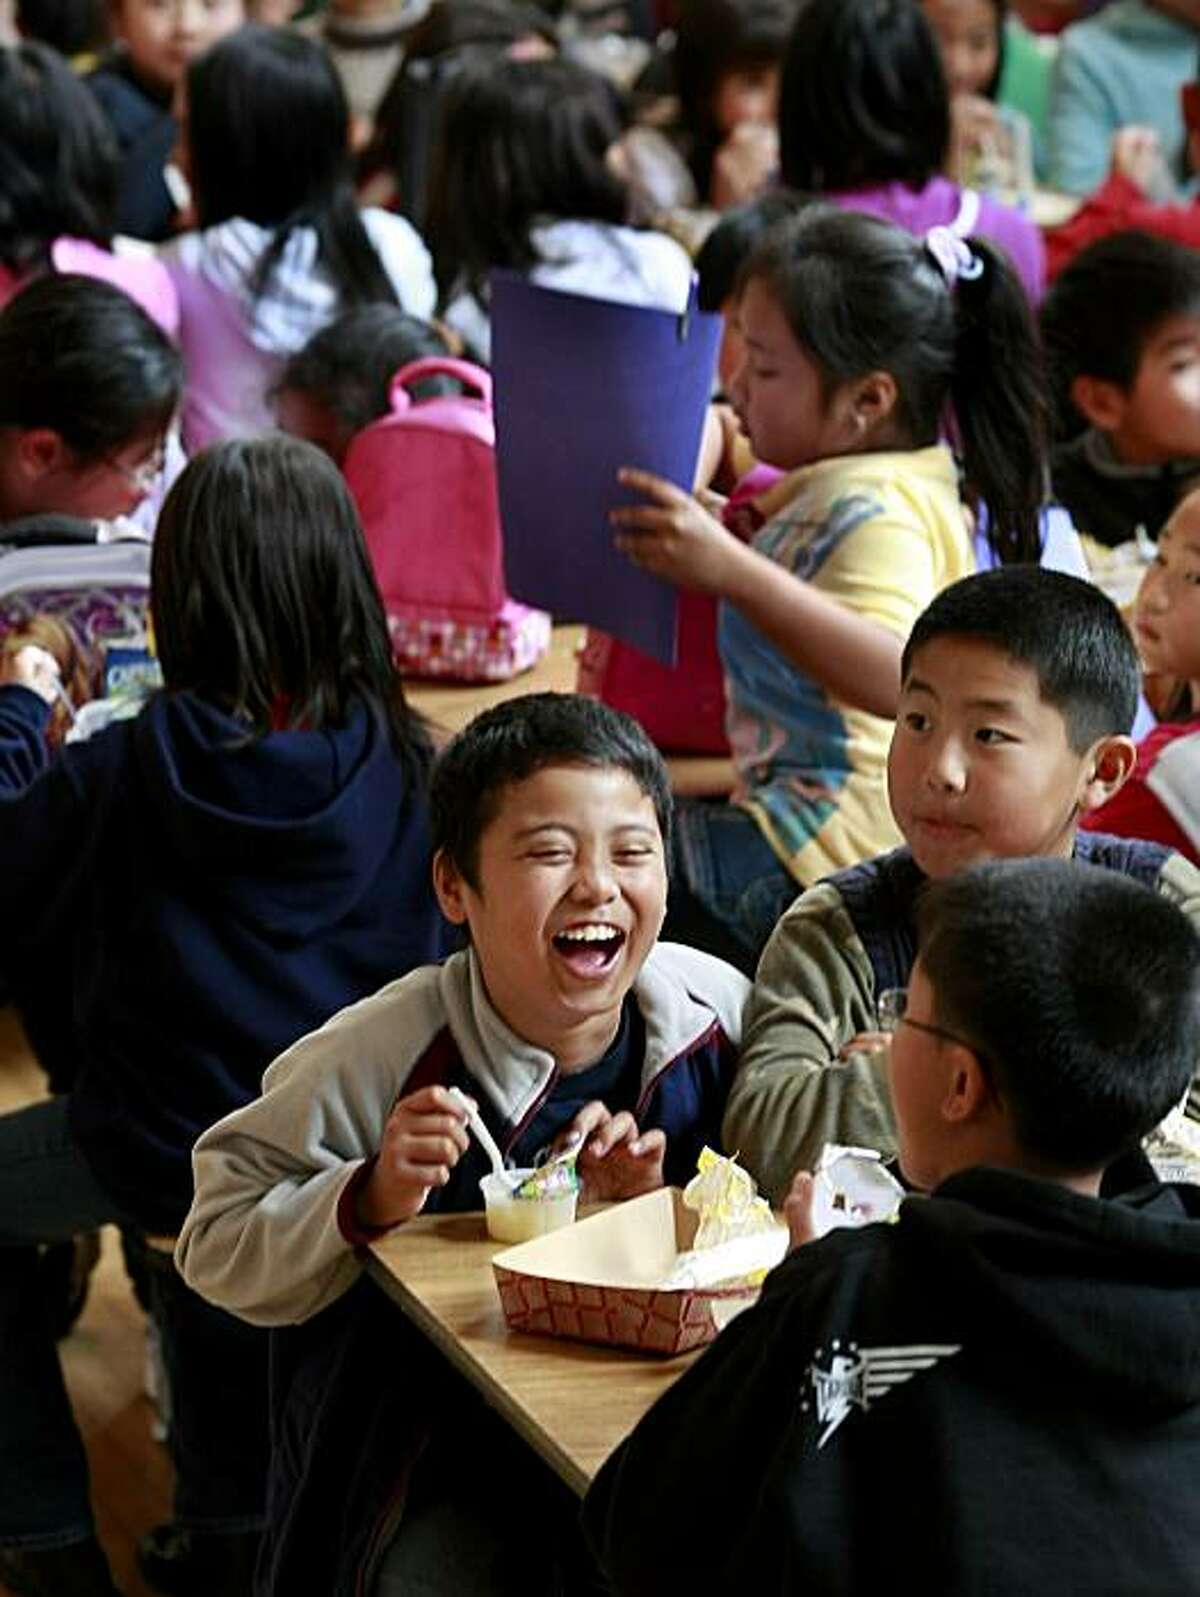 Fifth grader Jolas Feliz laughed as he was joined by classmates at lunchtime. Around 500 students at the Francis Scott Key Elementary School in San Francisco's Sunset district are served by the school lunch program and officials are proud of their efforts keeping the children fed every school day. The San Francisco School district has had problems managing the school lunch program and has recently lost some federal funding.